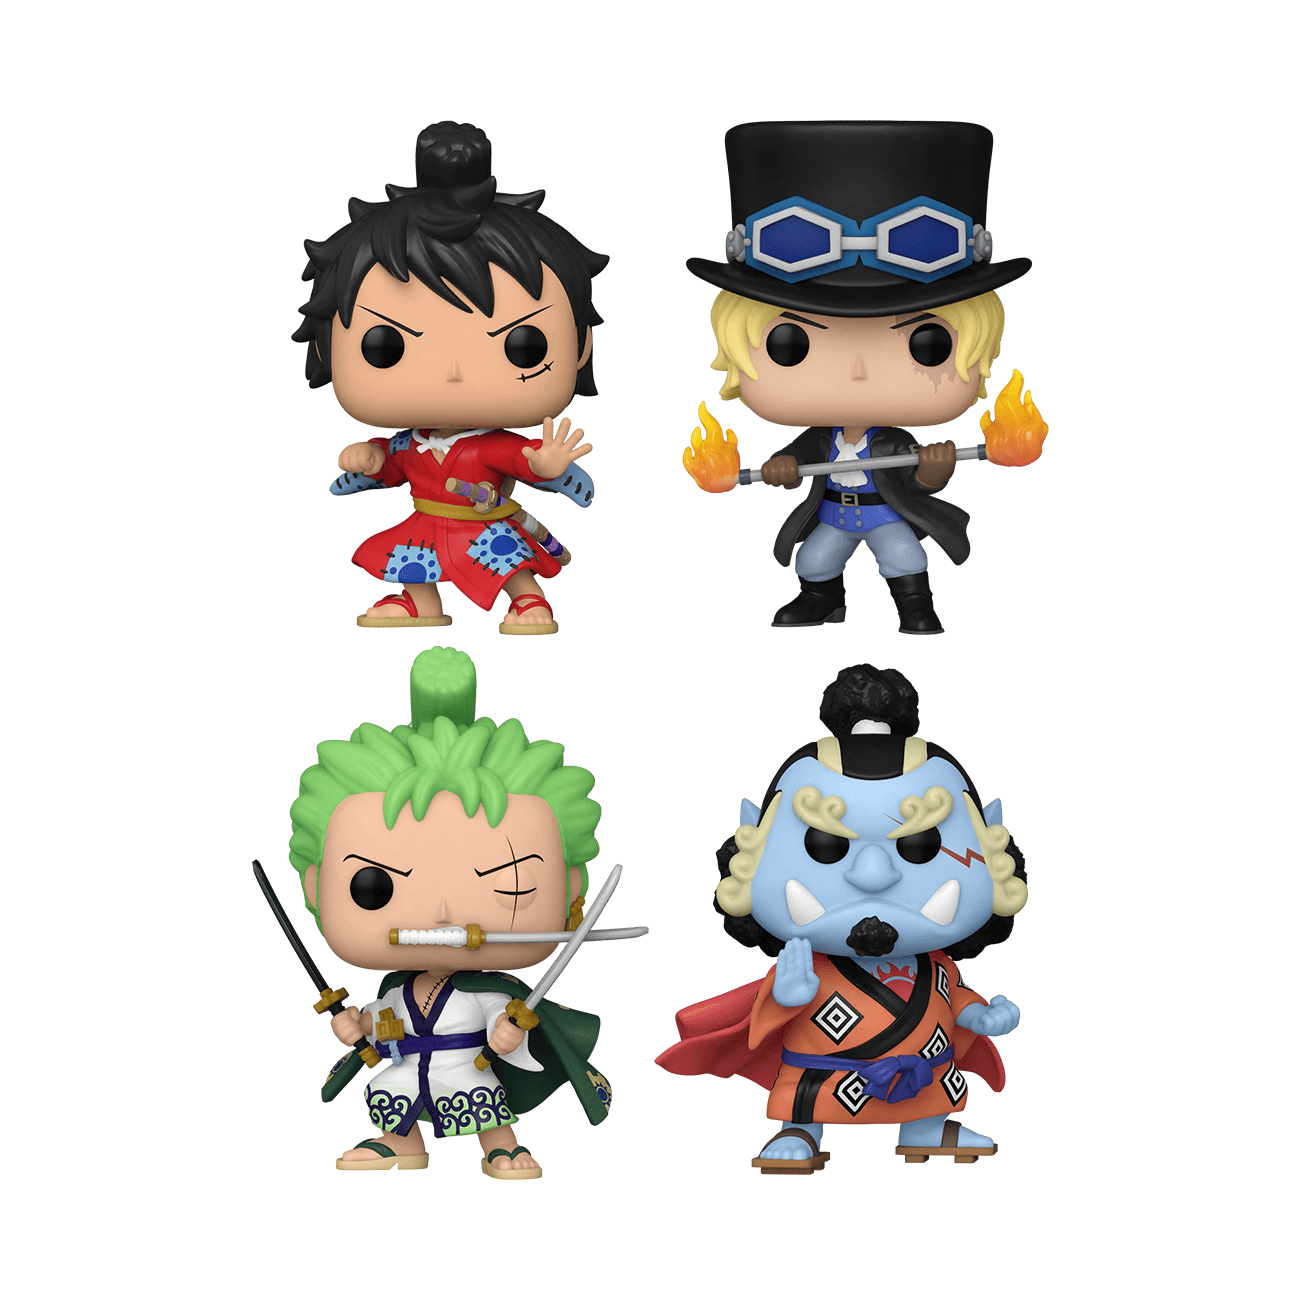 Buy Pop! One Piece 4-Pack at Funko.